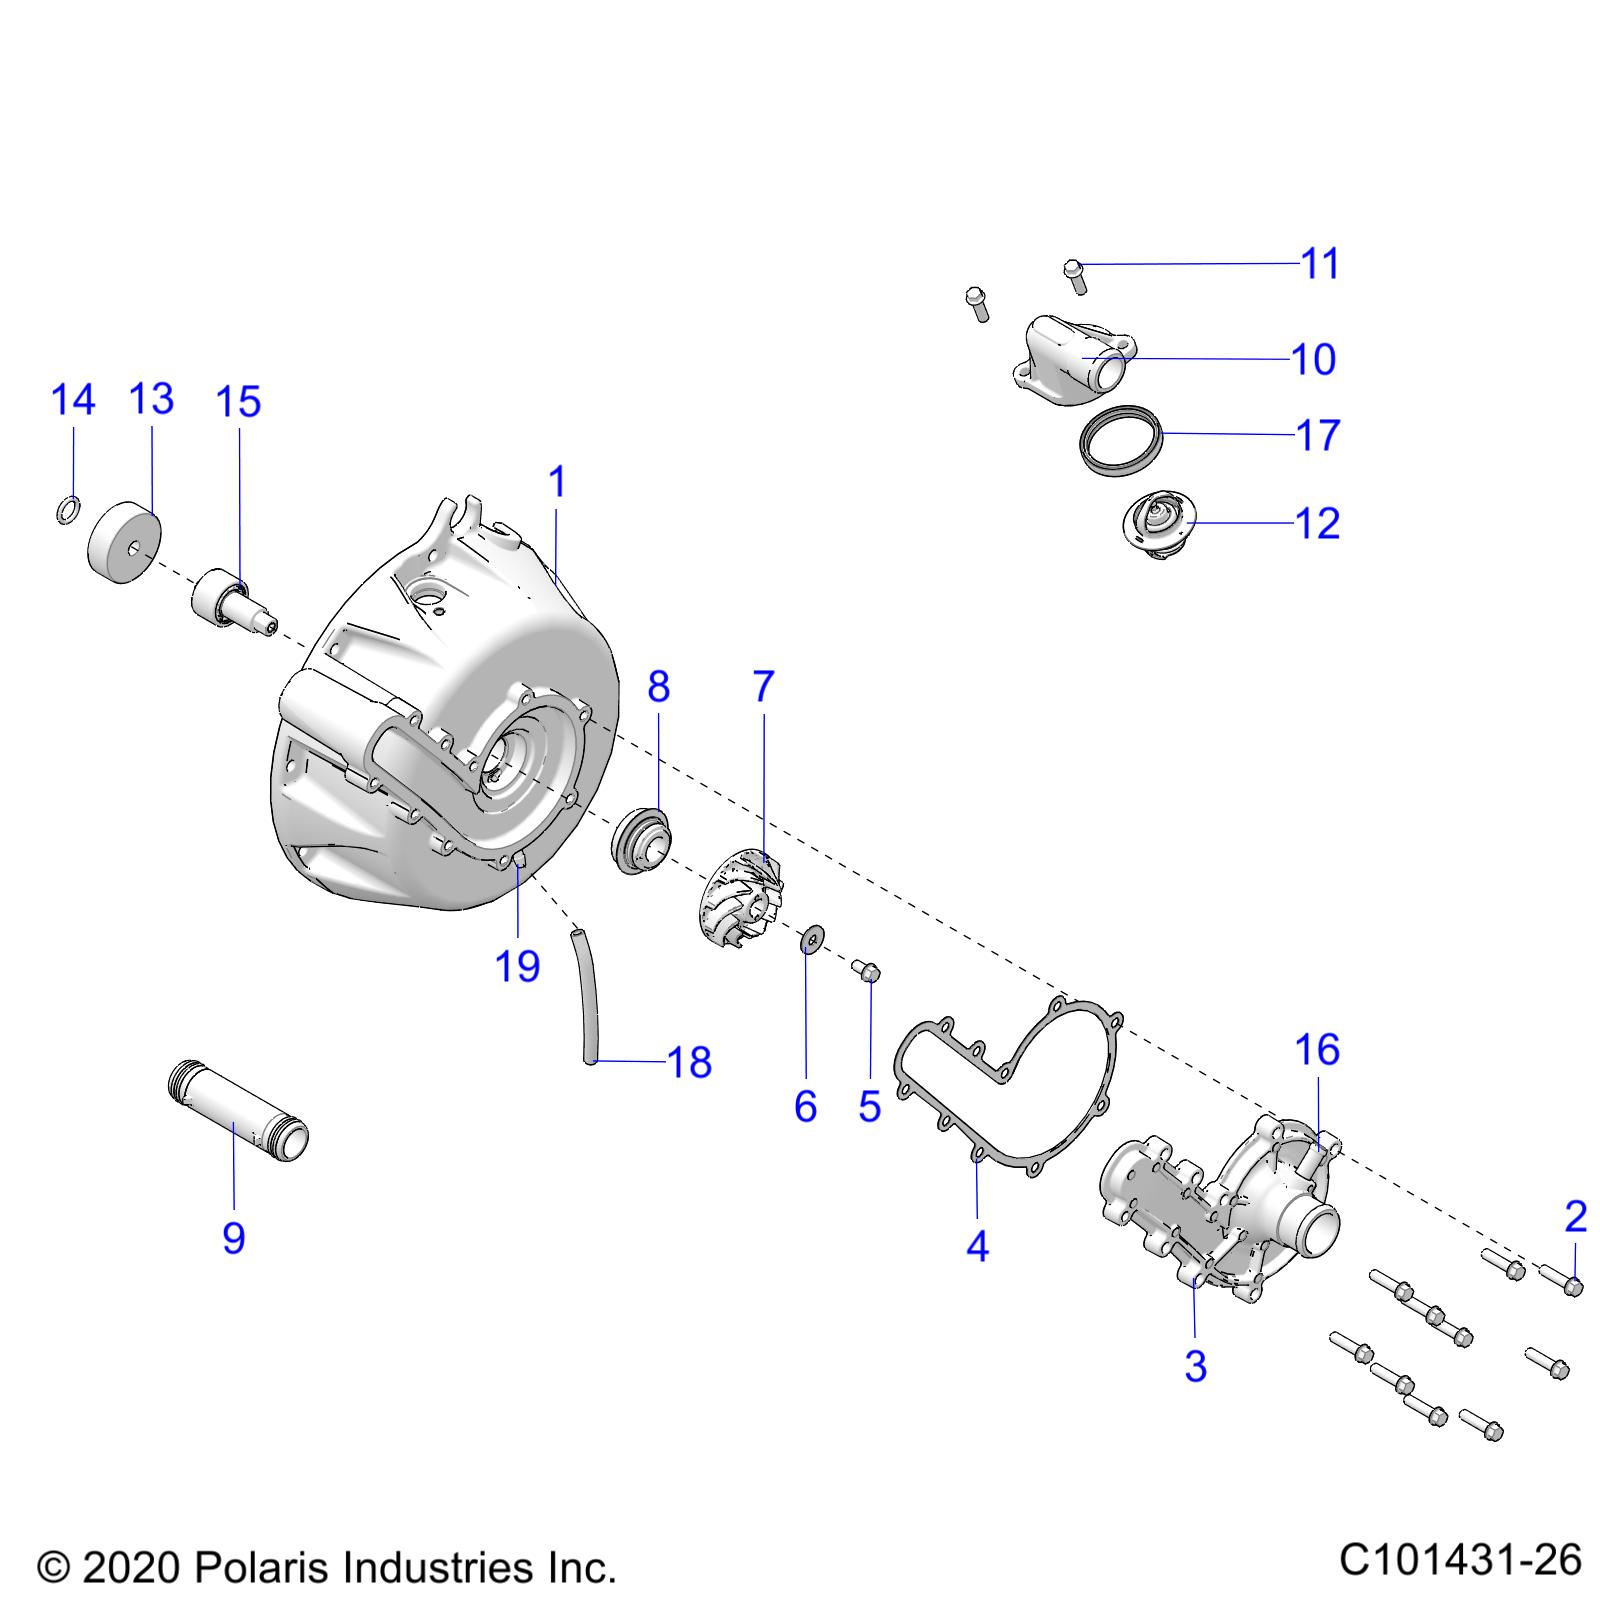 ENGINE, COOLING SYSTEM and WATER PUMP - A19SYS95CH (C101431-26)